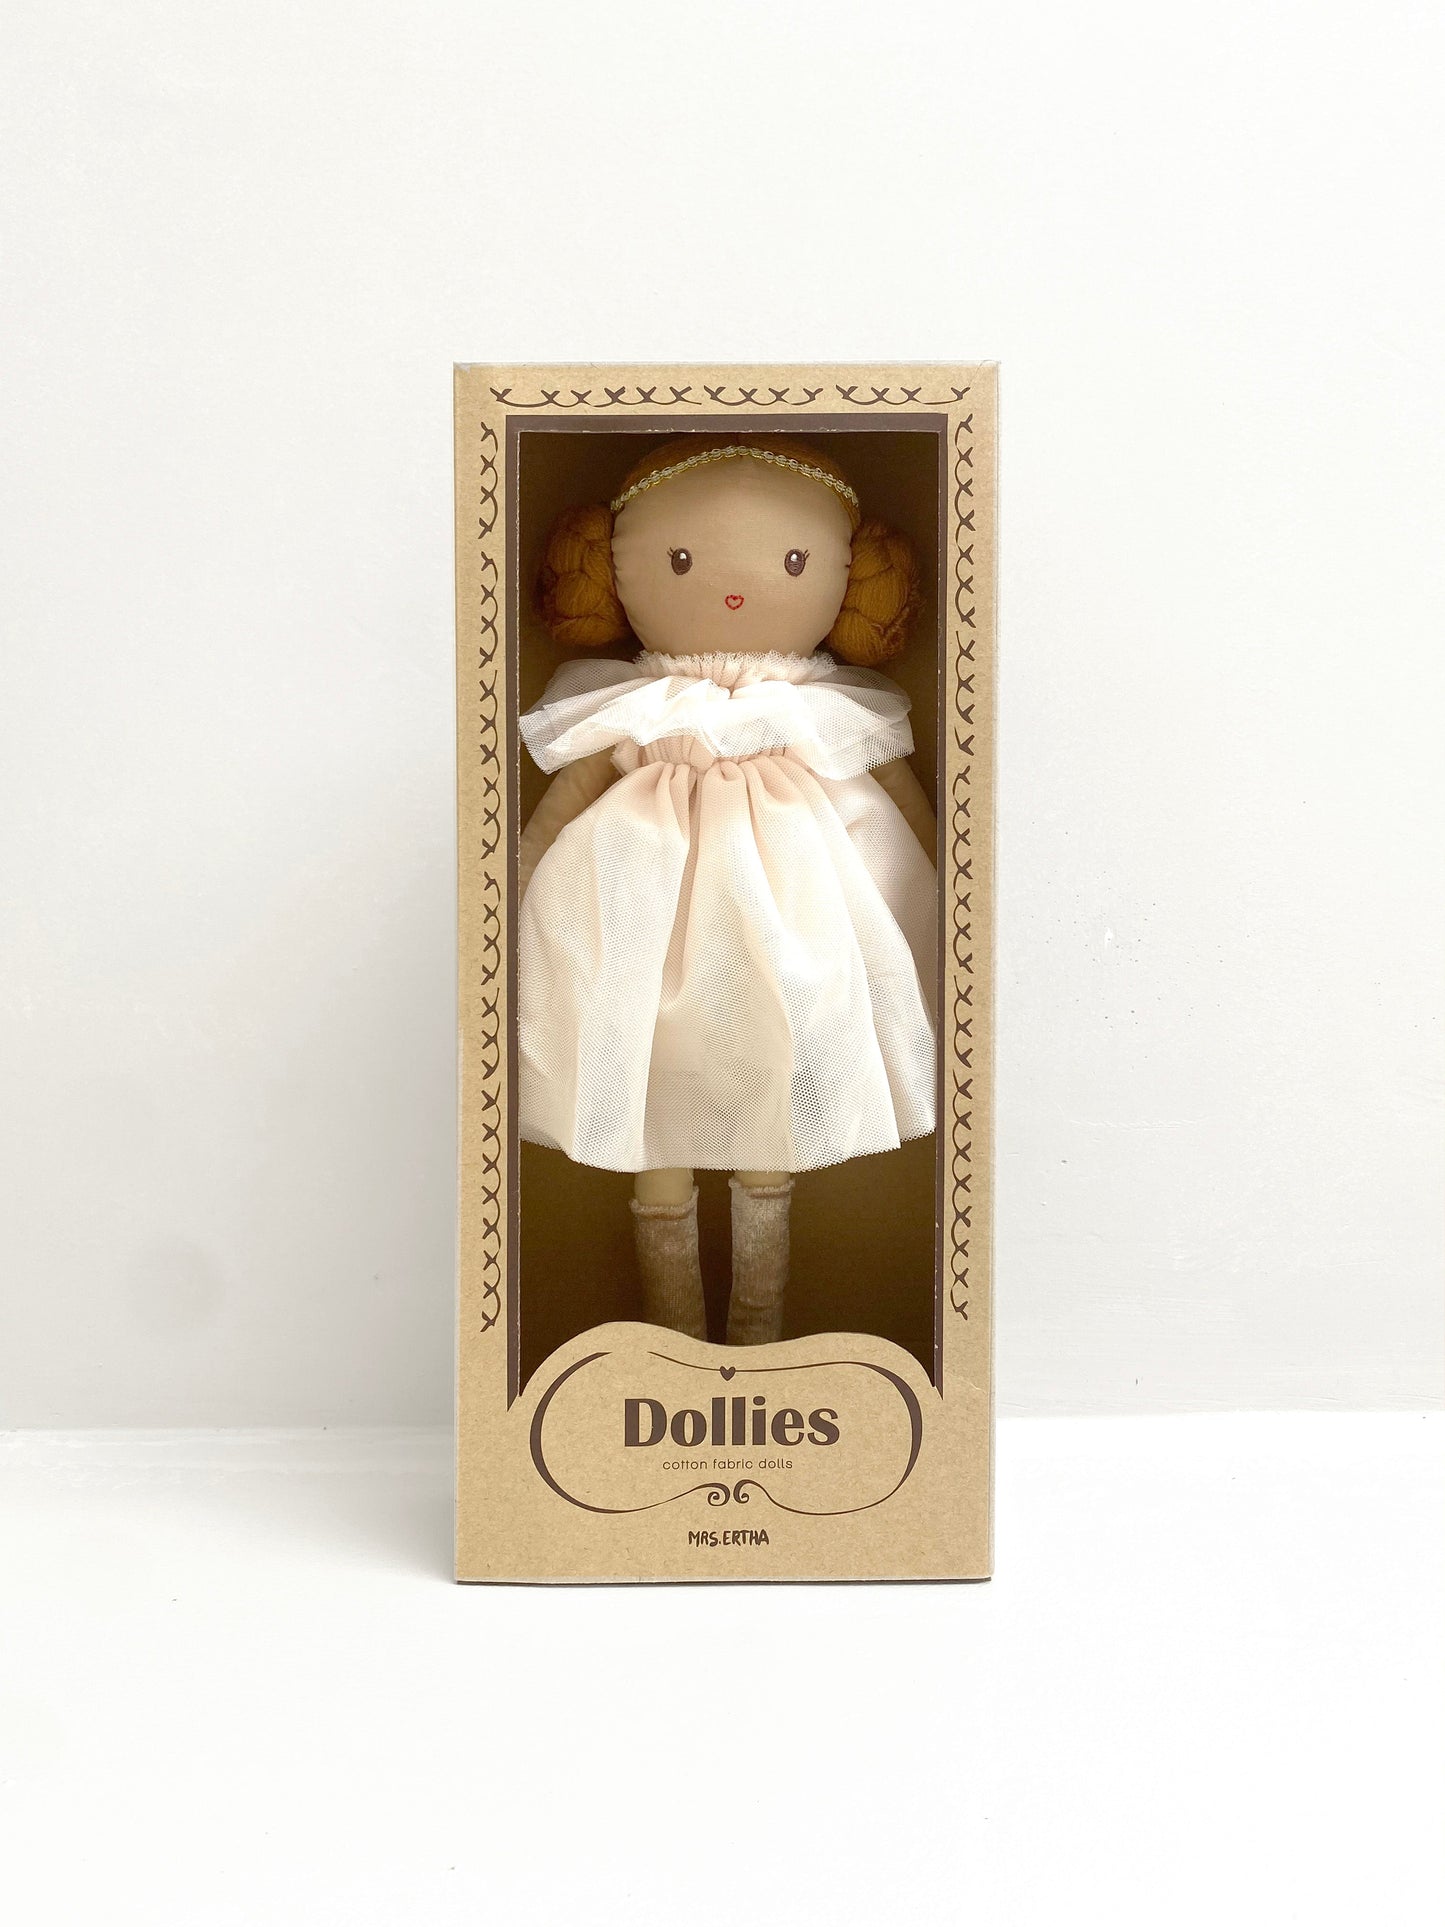 Dollie - Lilly Toots